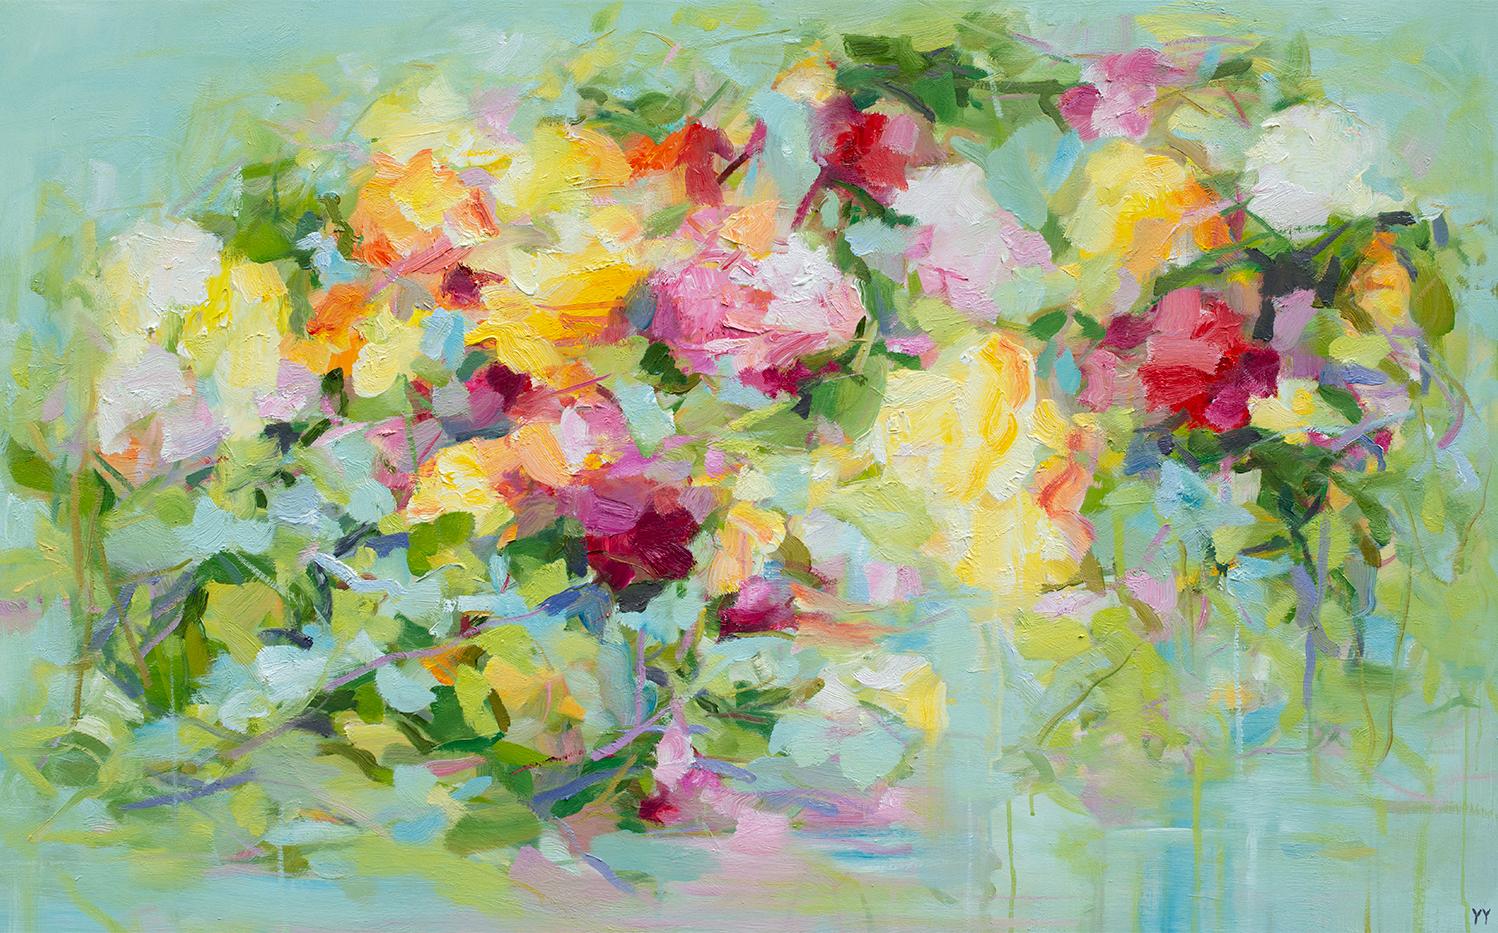 Available at Madelyn Jordon Fine Art. 'Midsummer' 2023 by Chinese/Canadian artist Yangyang Pan. Oil on canvas, 30 x 48 in. / Frame: 31 x 49 in. This beautiful abstract-expressionistic landscape painting incorporates gestural brushstrokes resembling